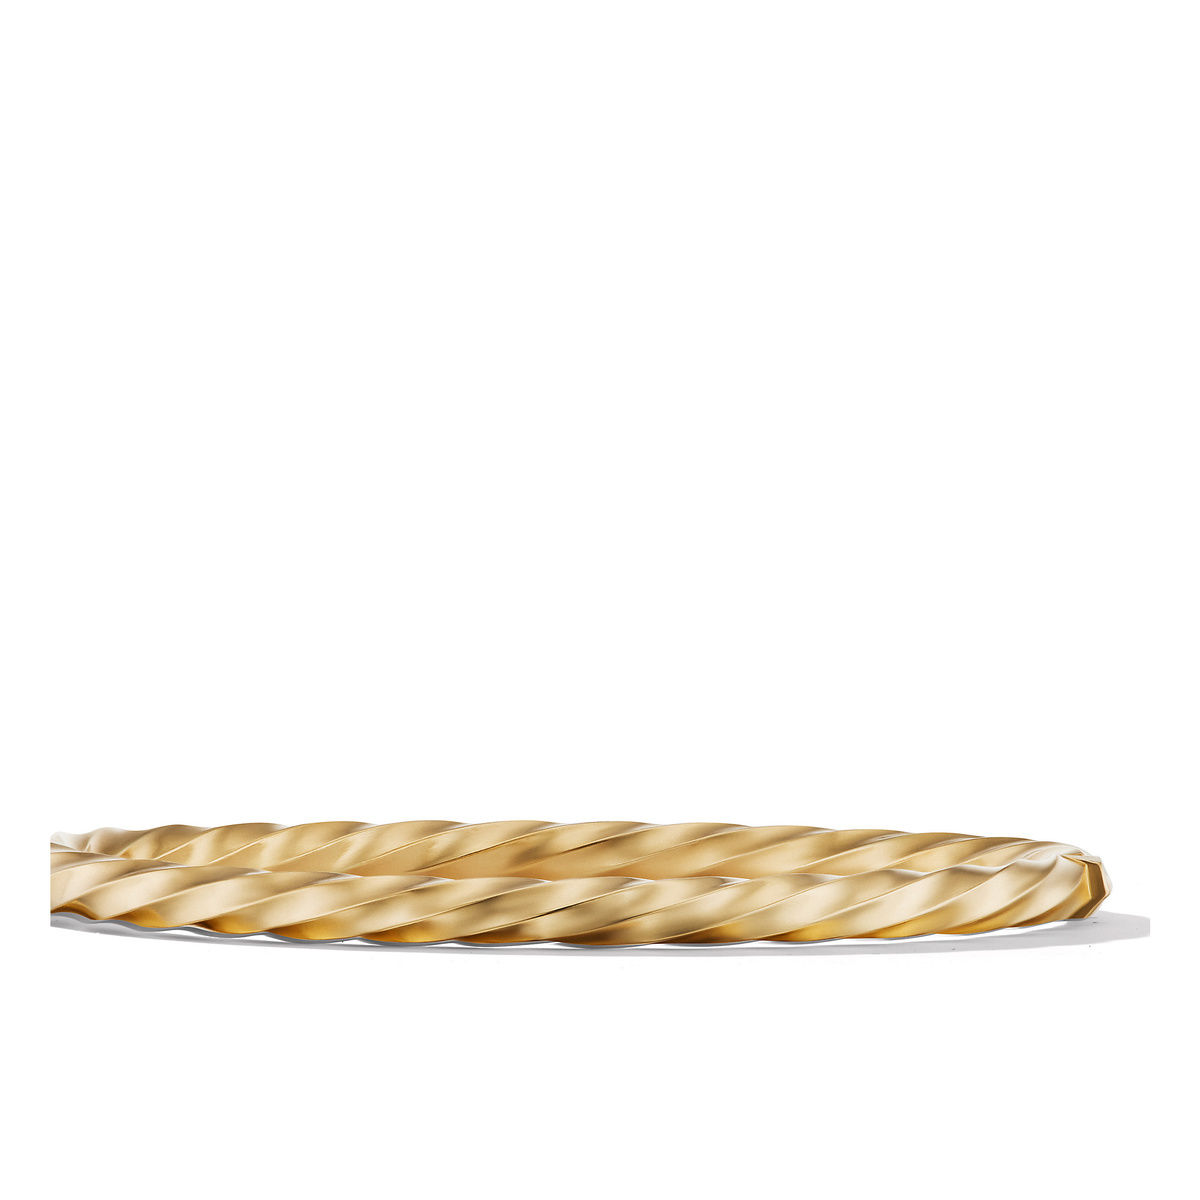 David Yurman Cable Edge Bracelet in Recycled 18K Yellow Gold - Small